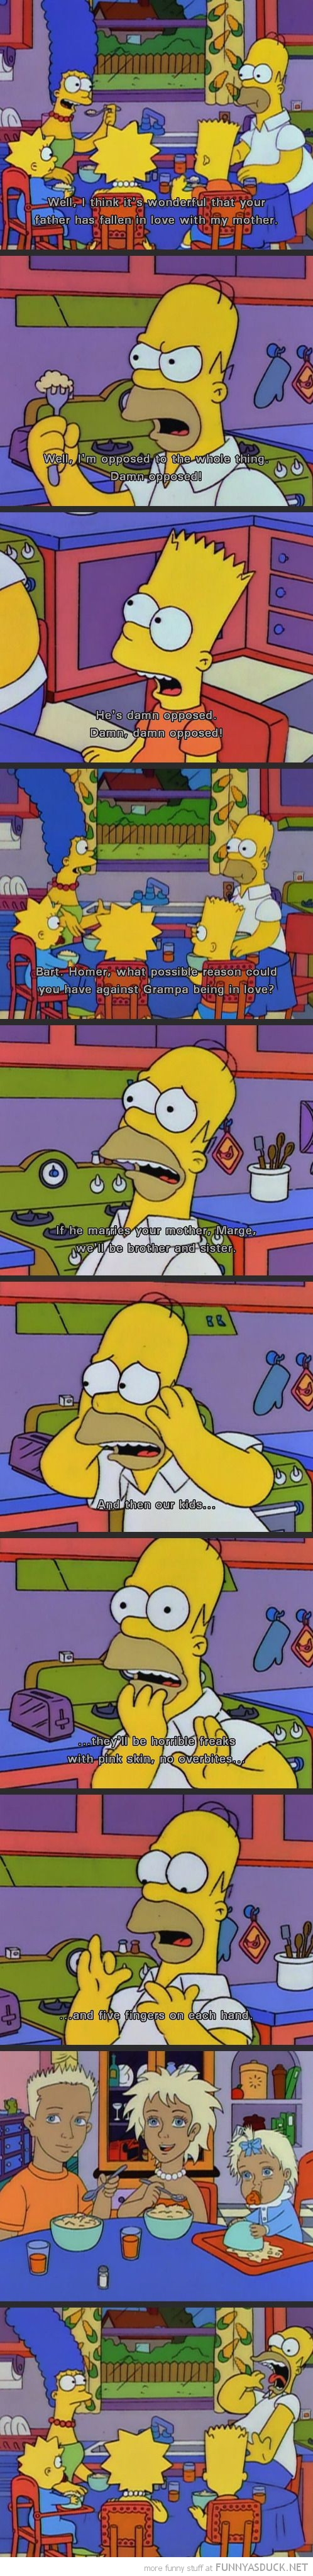 One Of The Funniest Simpsons Moments